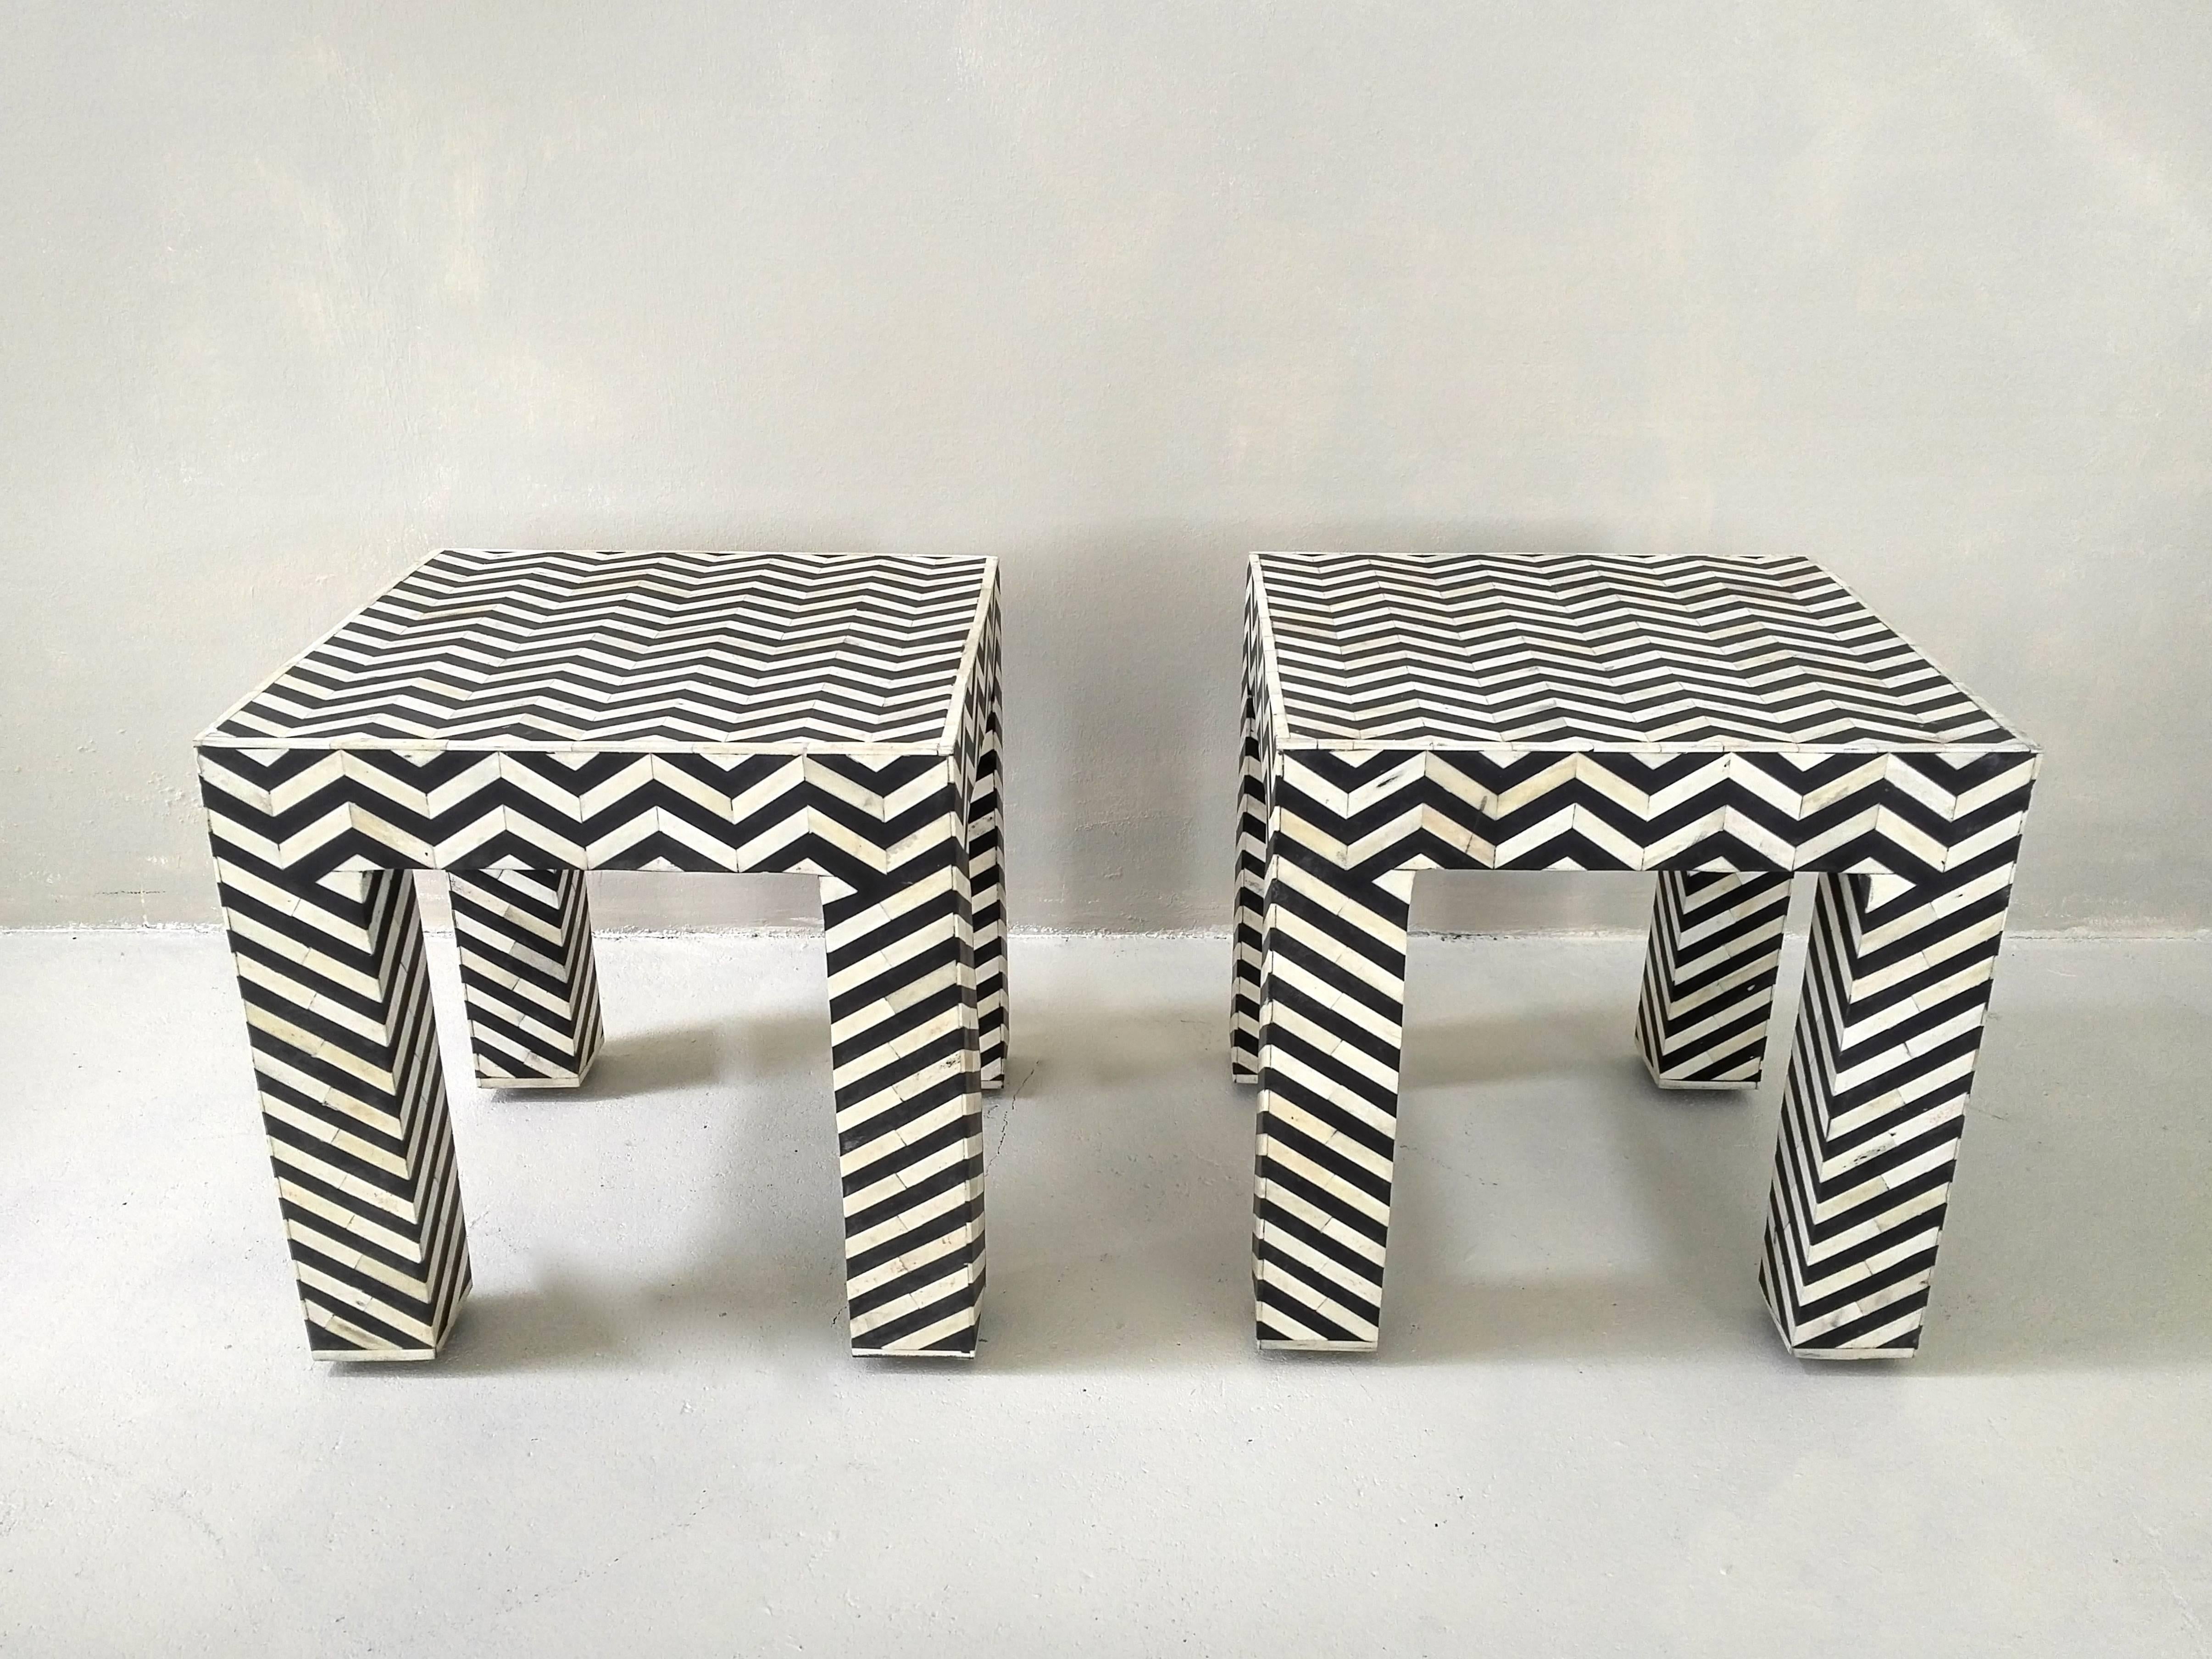 European Geometric Patterned Black and White Bone Inlay Side Tables